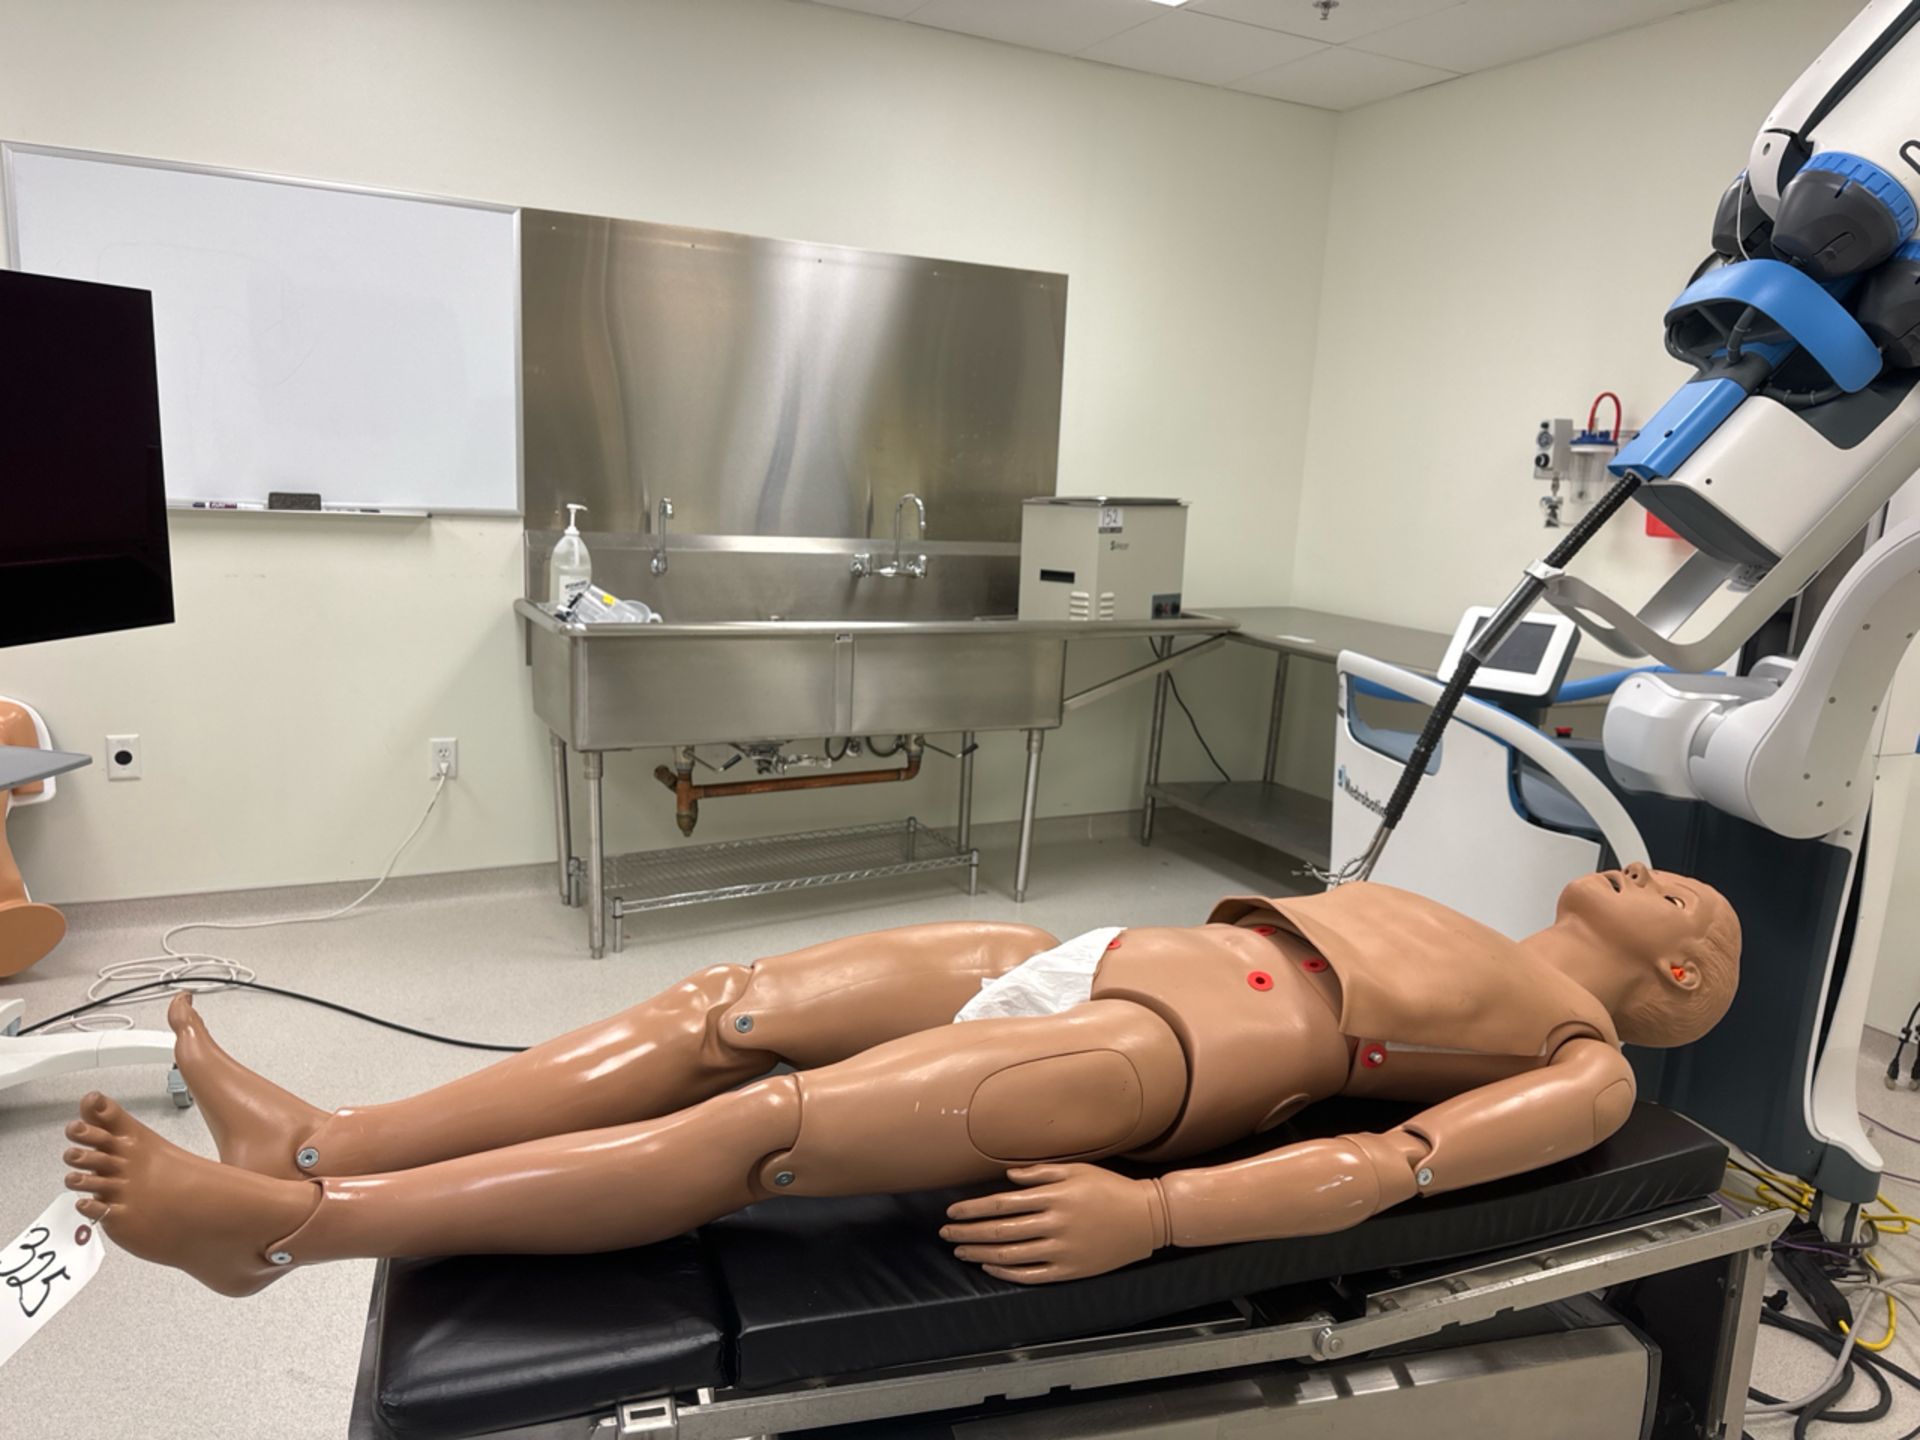 Universal Medical Human Mannequin - Image 4 of 6